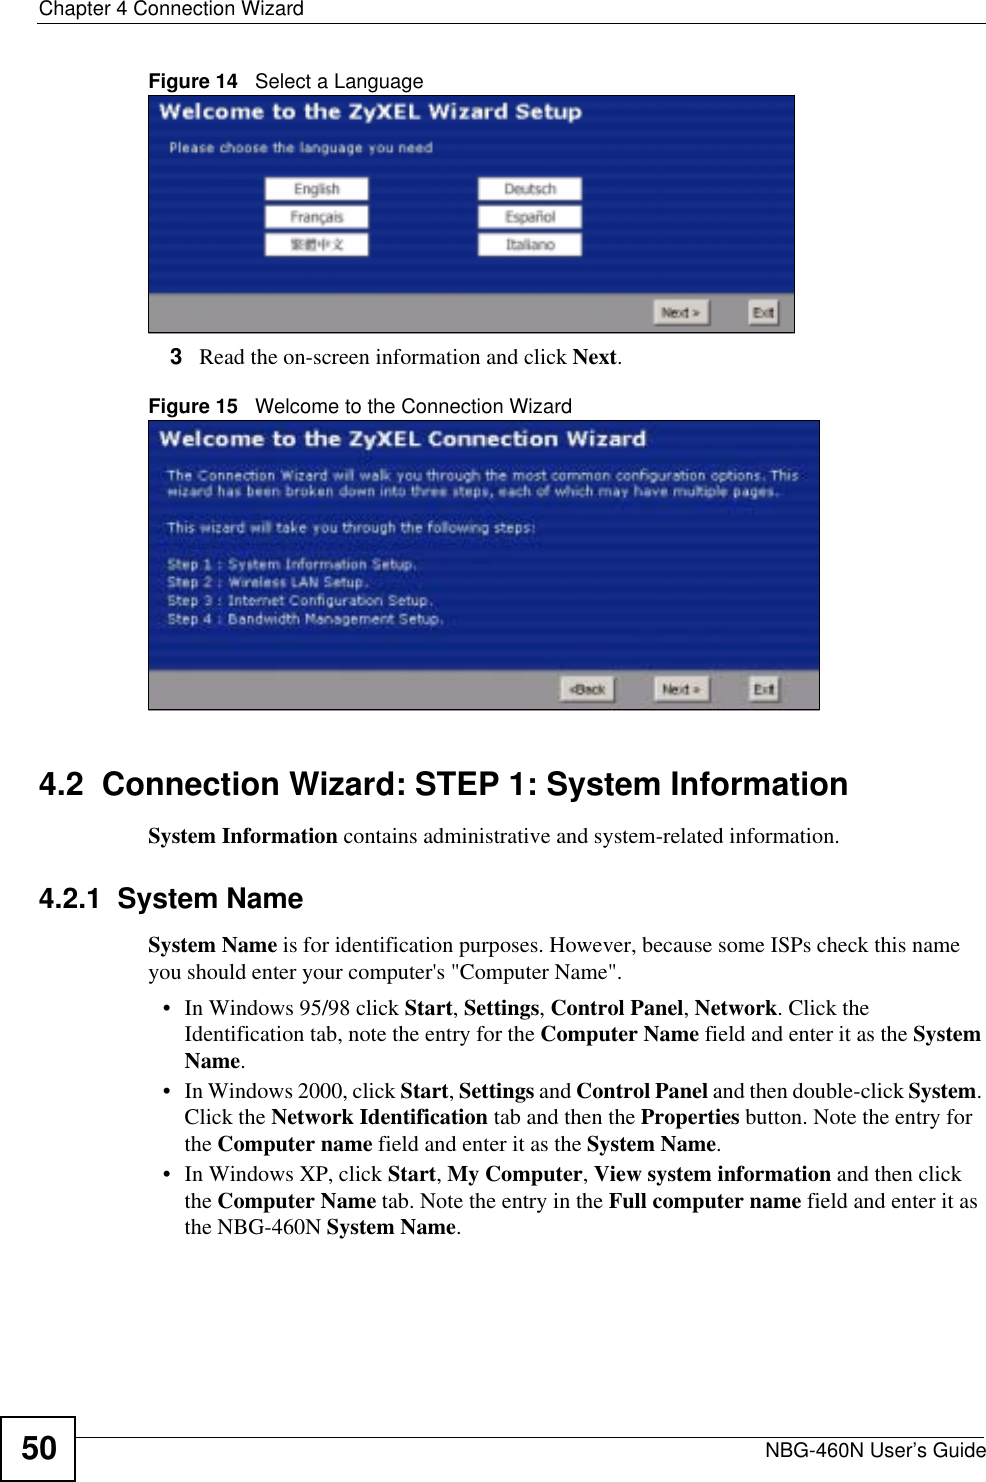 Chapter 4 Connection WizardNBG-460N User’s Guide50Figure 14   Select a Language3Read the on-screen information and click Next.Figure 15   Welcome to the Connection Wizard4.2  Connection Wizard: STEP 1: System InformationSystem Information contains administrative and system-related information.4.2.1  System NameSystem Name is for identification purposes. However, because some ISPs check this name you should enter your computer&apos;s &quot;Computer Name&quot;. • In Windows 95/98 click Start, Settings, Control Panel, Network. Click the Identification tab, note the entry for the Computer Name field and enter it as the SystemName.• In Windows 2000, click Start, Settings and Control Panel and then double-click System.Click the Network Identification tab and then the Properties button. Note the entry for the Computer name field and enter it as the System Name.• In Windows XP, click Start, My Computer, View system information and then click the Computer Name tab. Note the entry in the Full computer name field and enter it as the NBG-460N System Name.